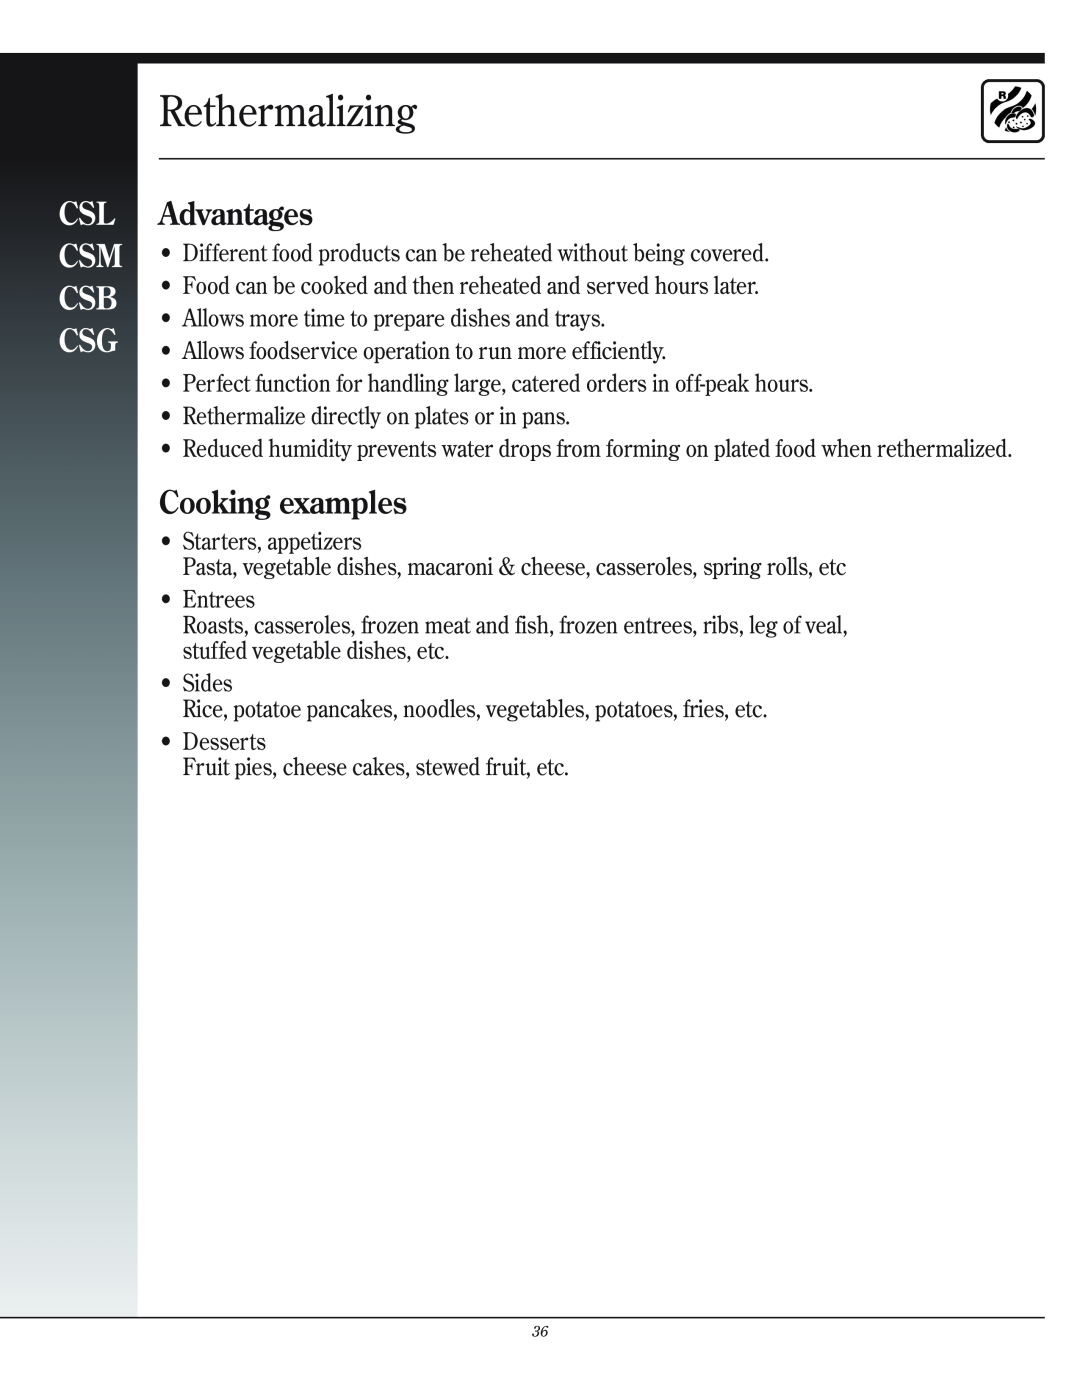 Henny Penny CSG manual Rethermalizing, Advantages, Cooking examples, Csl Csm Csb Csg 